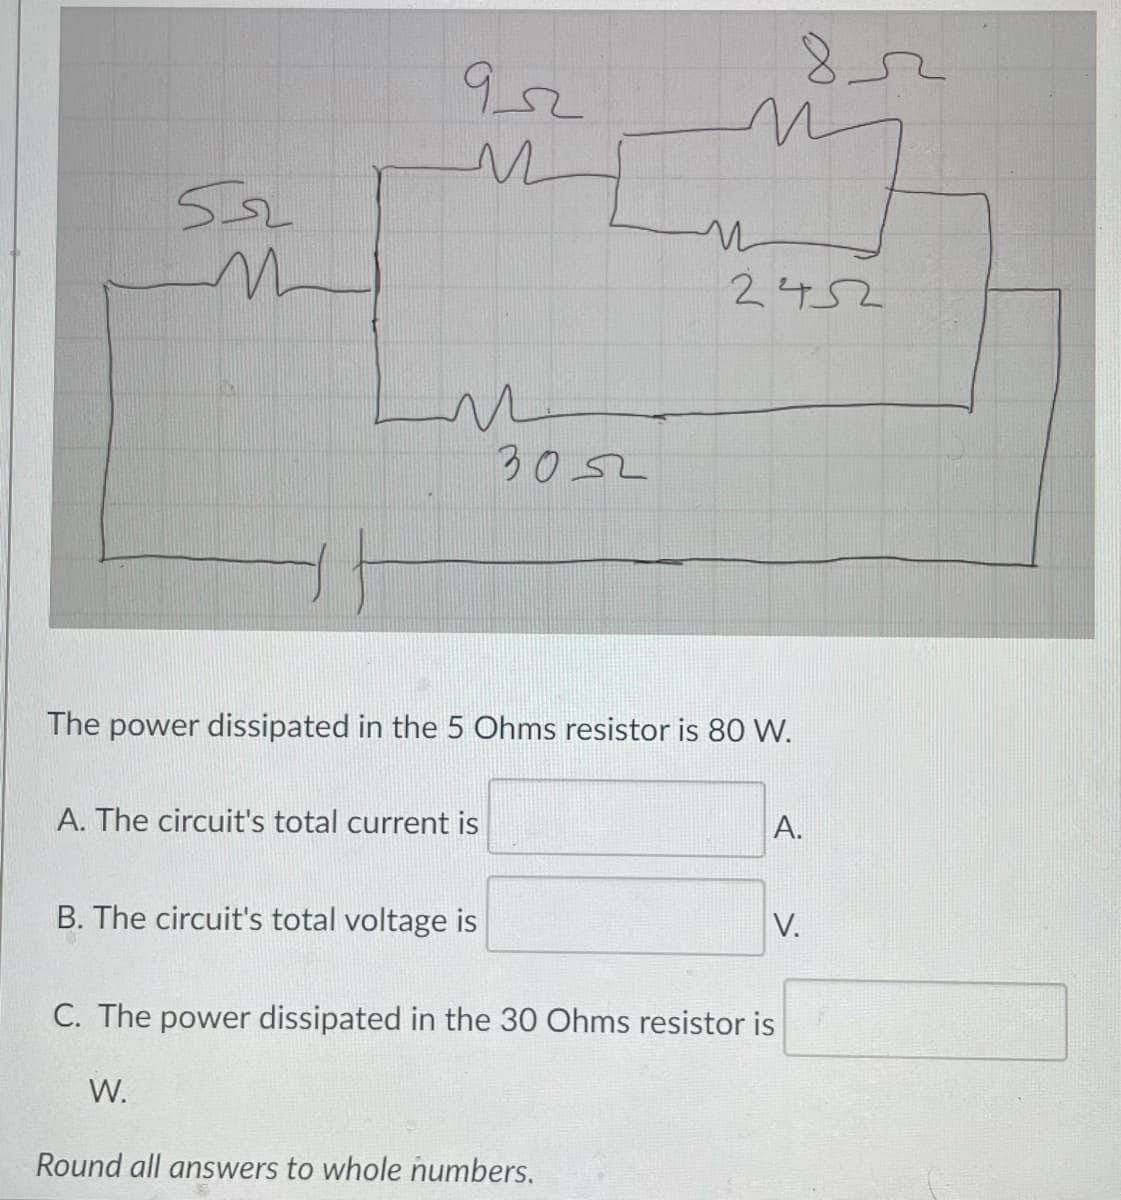 852
9,2
2452
3052
The power dissipated in the 5 Ohms resistor is 80 W.
A. The circuit's total current is
A.
B. The circuit's total voltage is
V.
C. The power dissipated in the 30 Ohms resistor is
W.
Round all answers to whole numbers.
